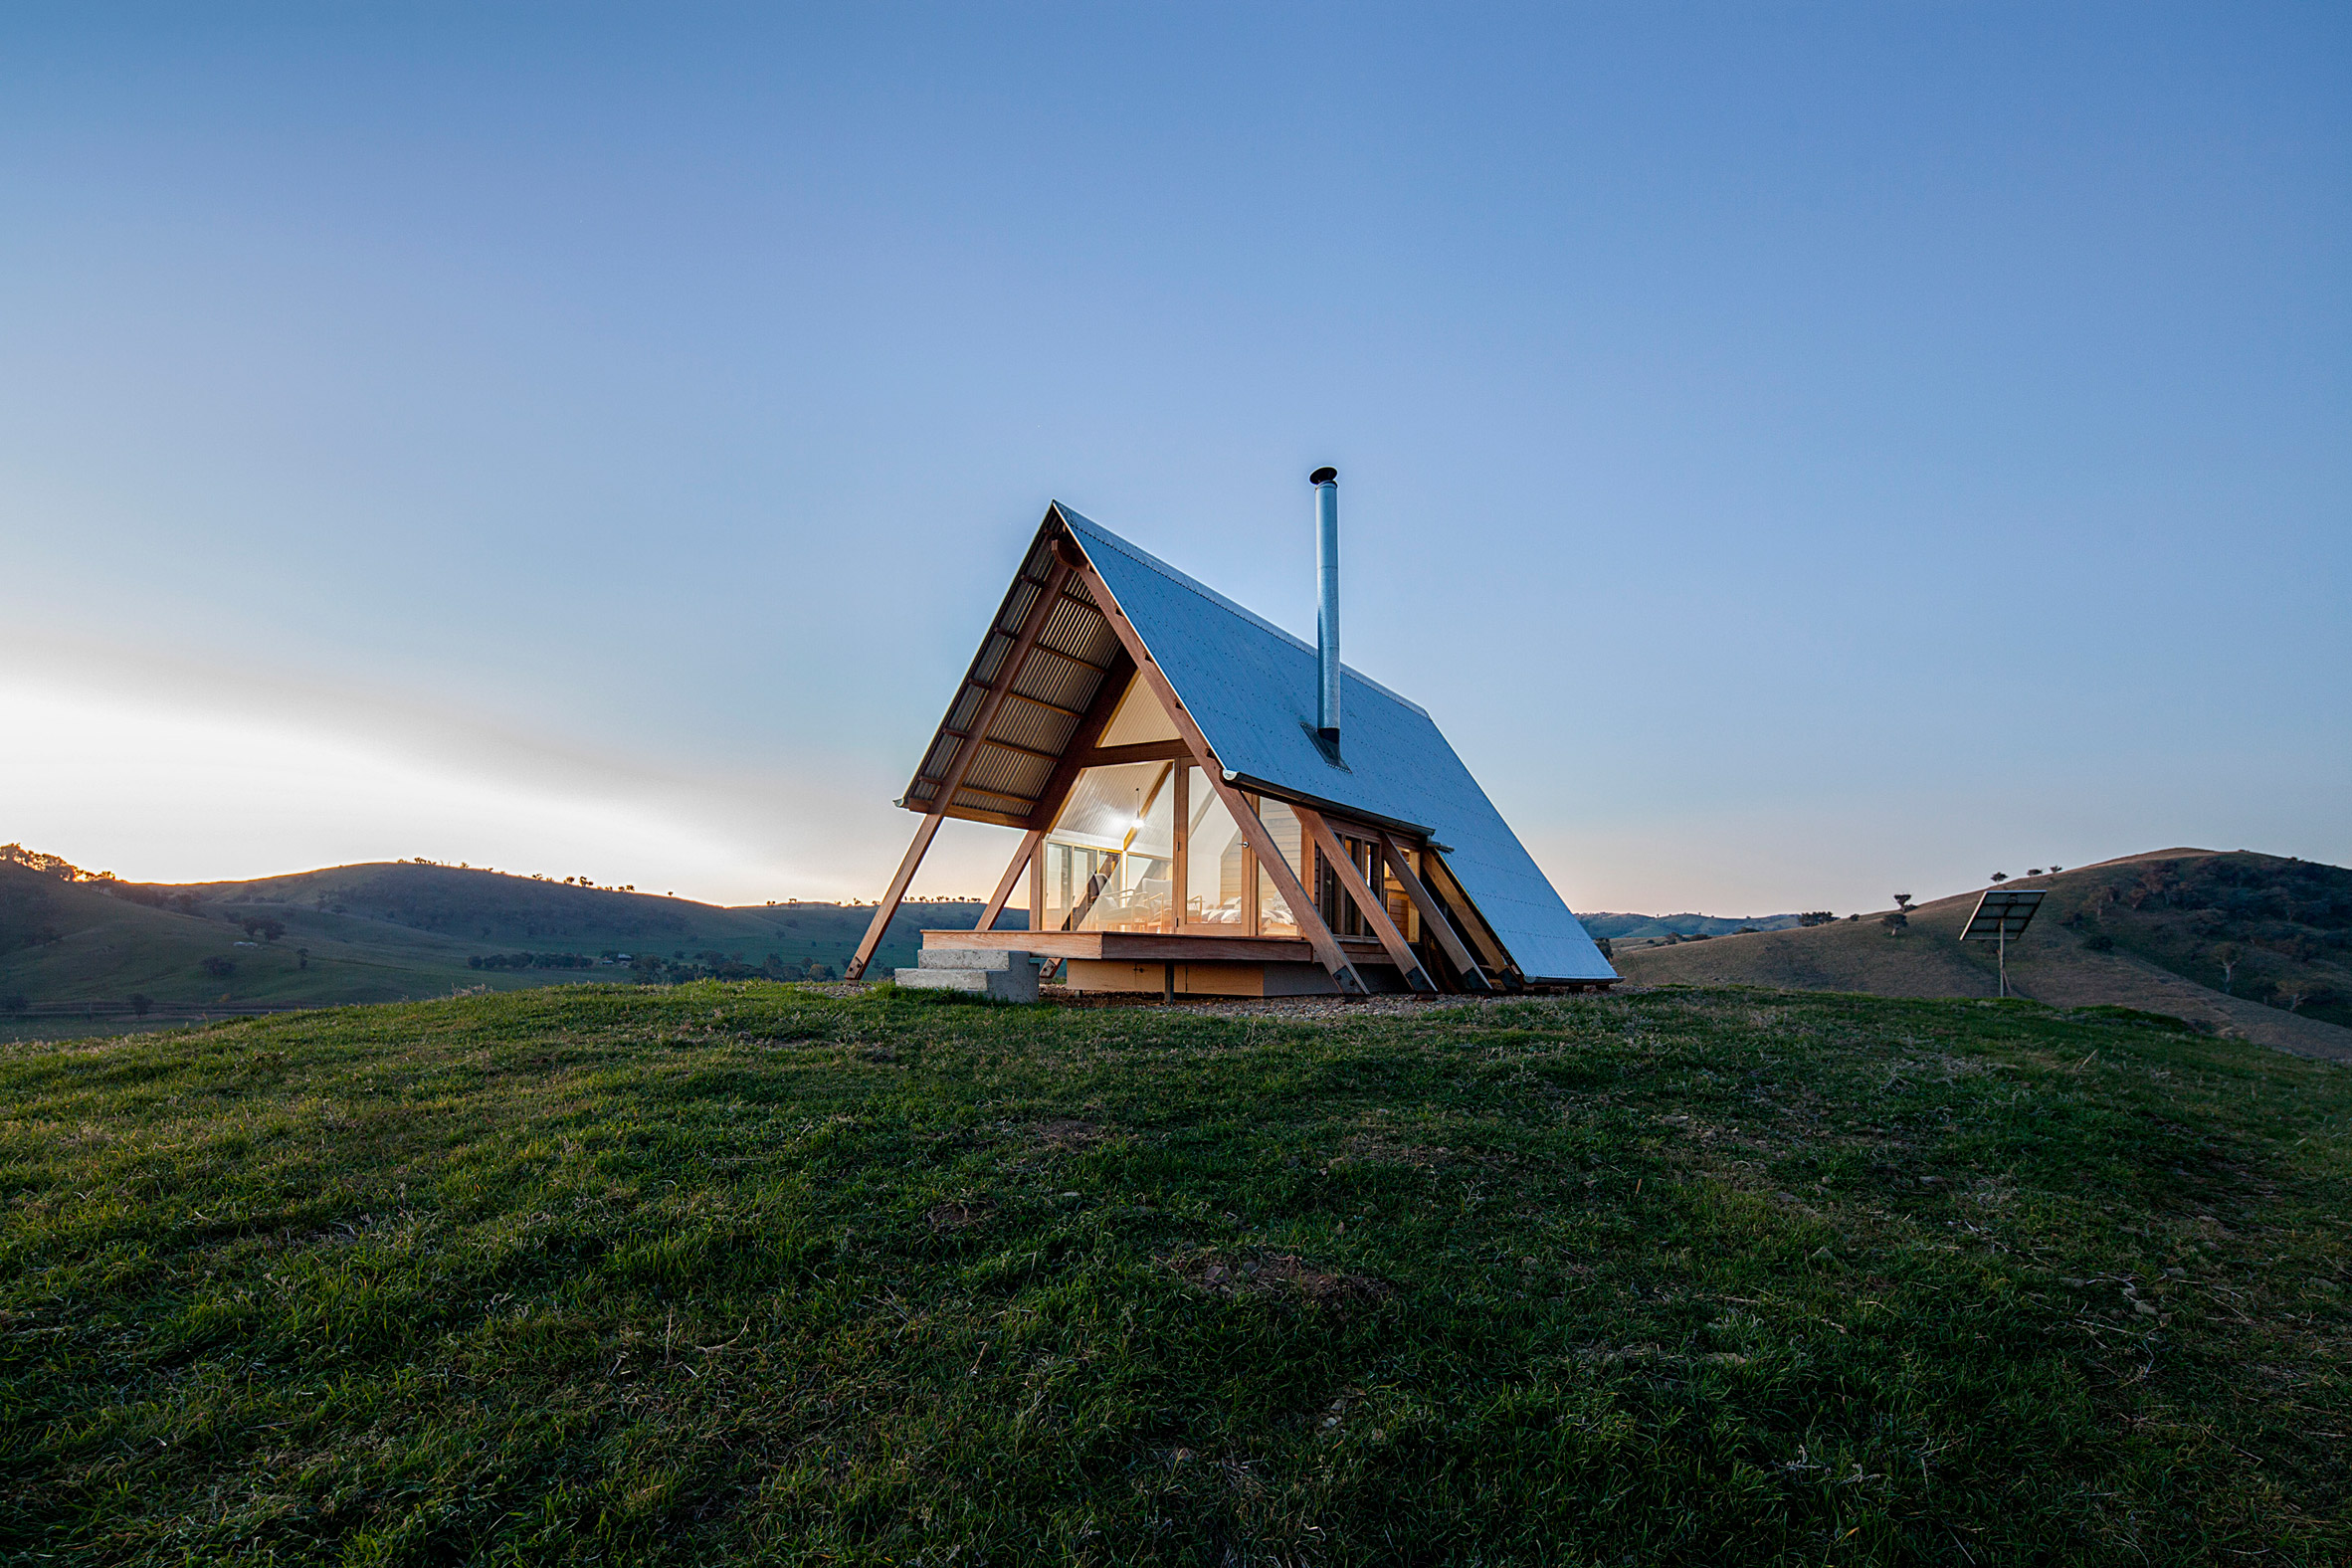 Remote Airbnb hut offers holidaymakers vistas over the Kimo Valley